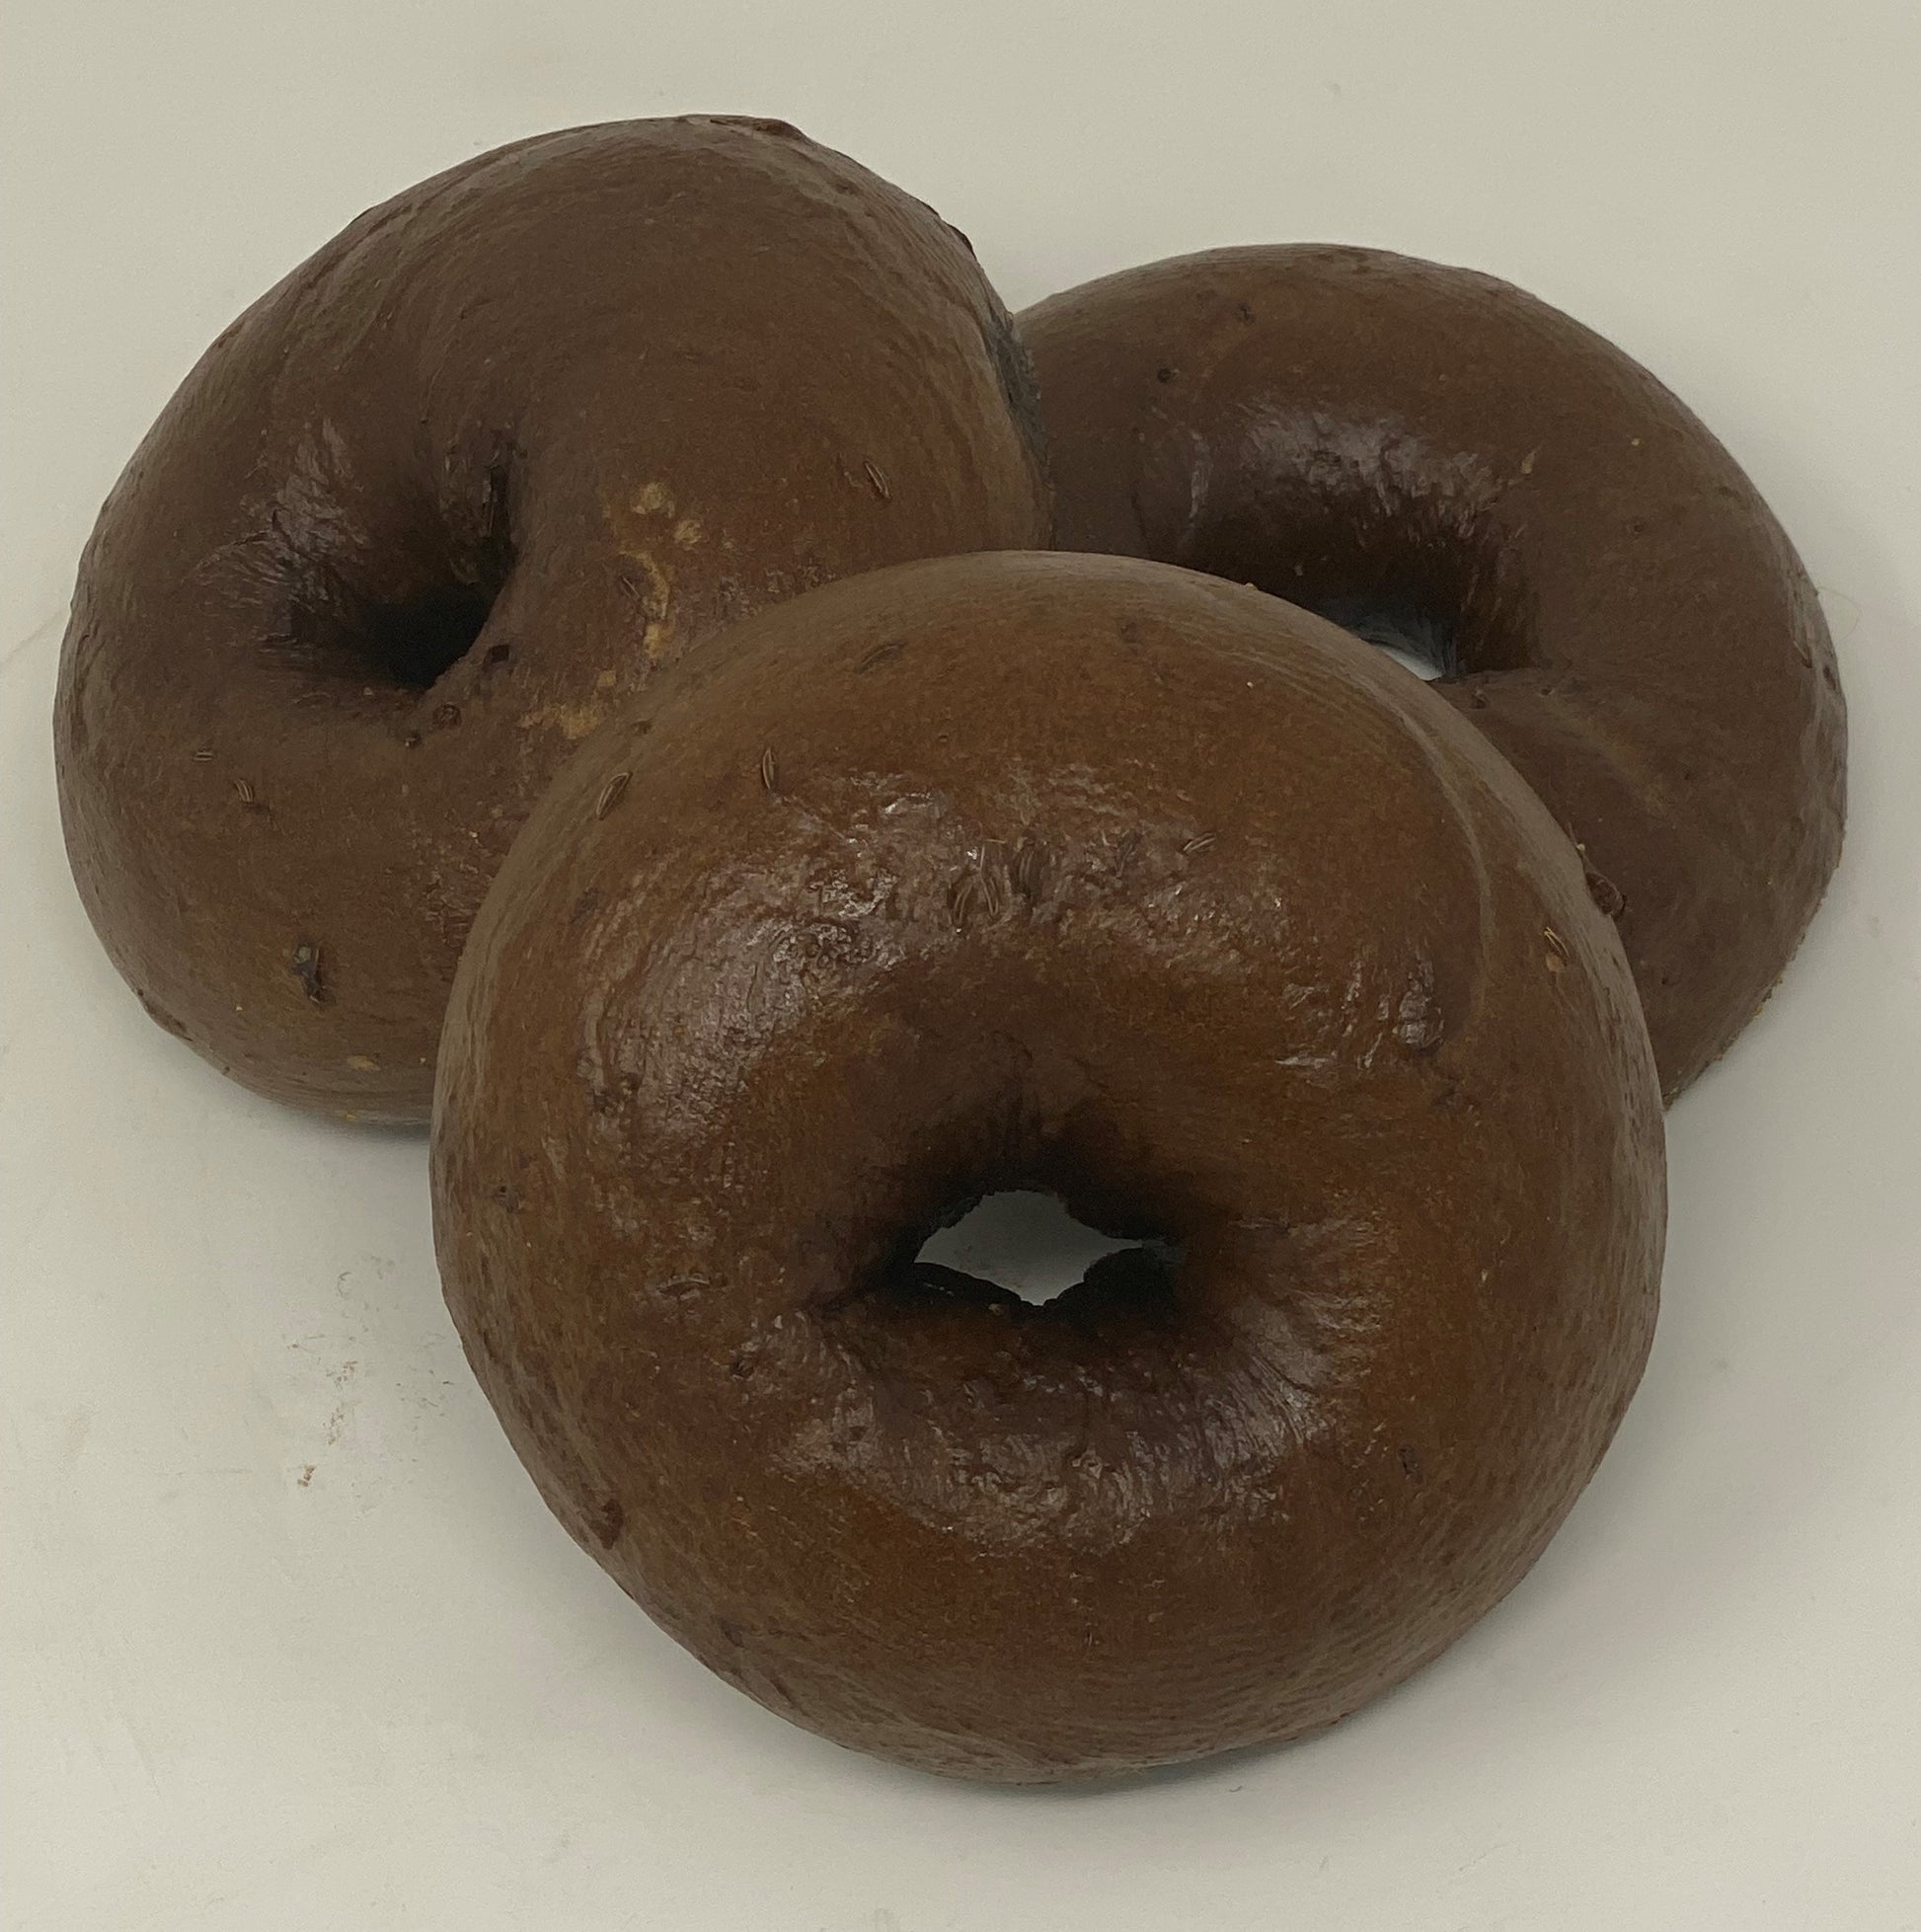 New York Style Pumpernickel bagels. Our bagels are boiled and baked, not steamed. A little tough on the outside and soft on the inside.